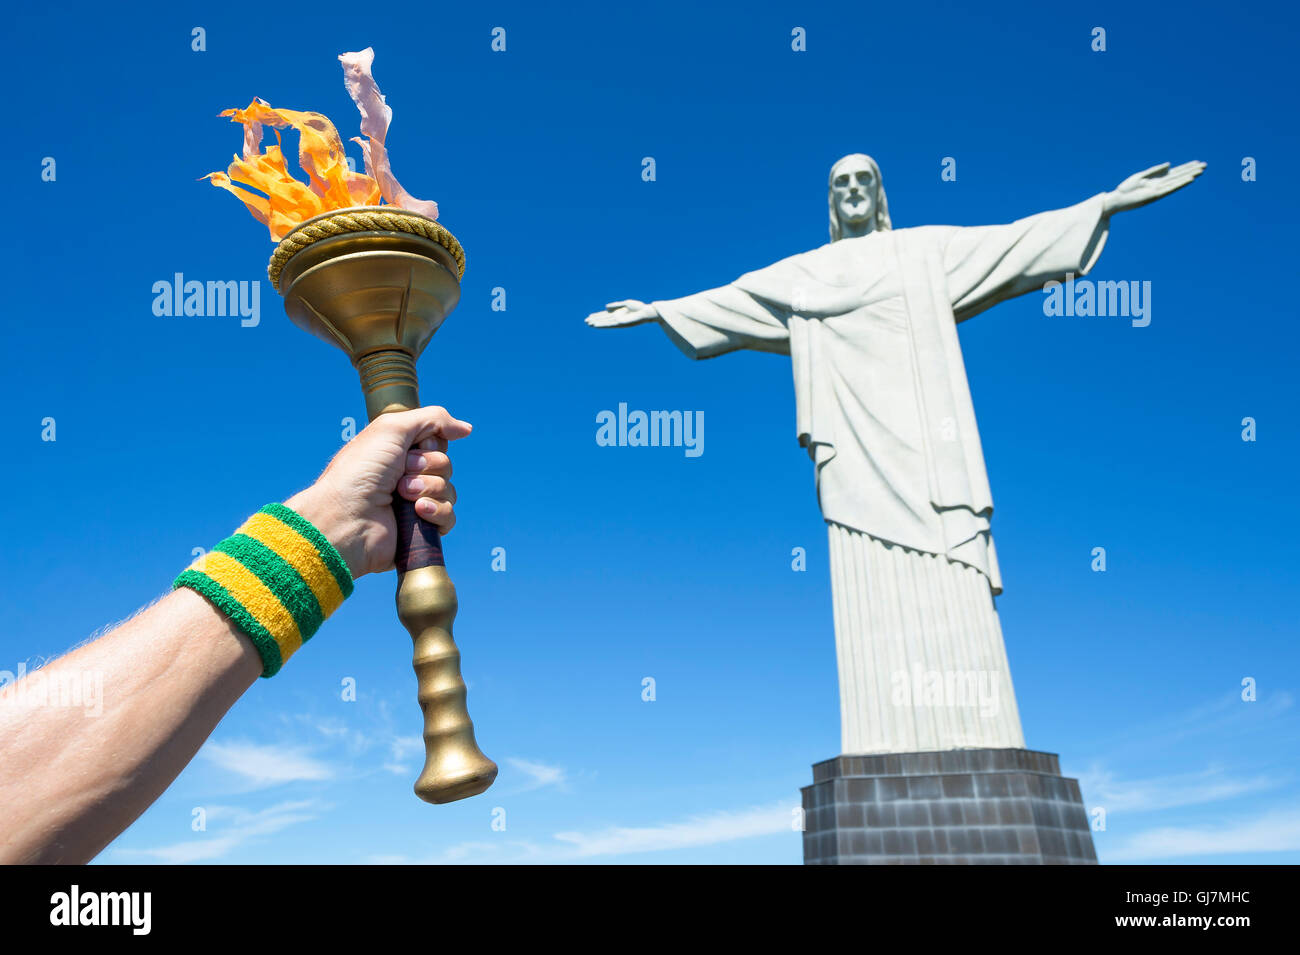 RIO DE JANEIRO - MARCH 21, 2016: Torchbearer holding torch in front of statue of Christ the Redeemer at Corcovado. Stock Photo